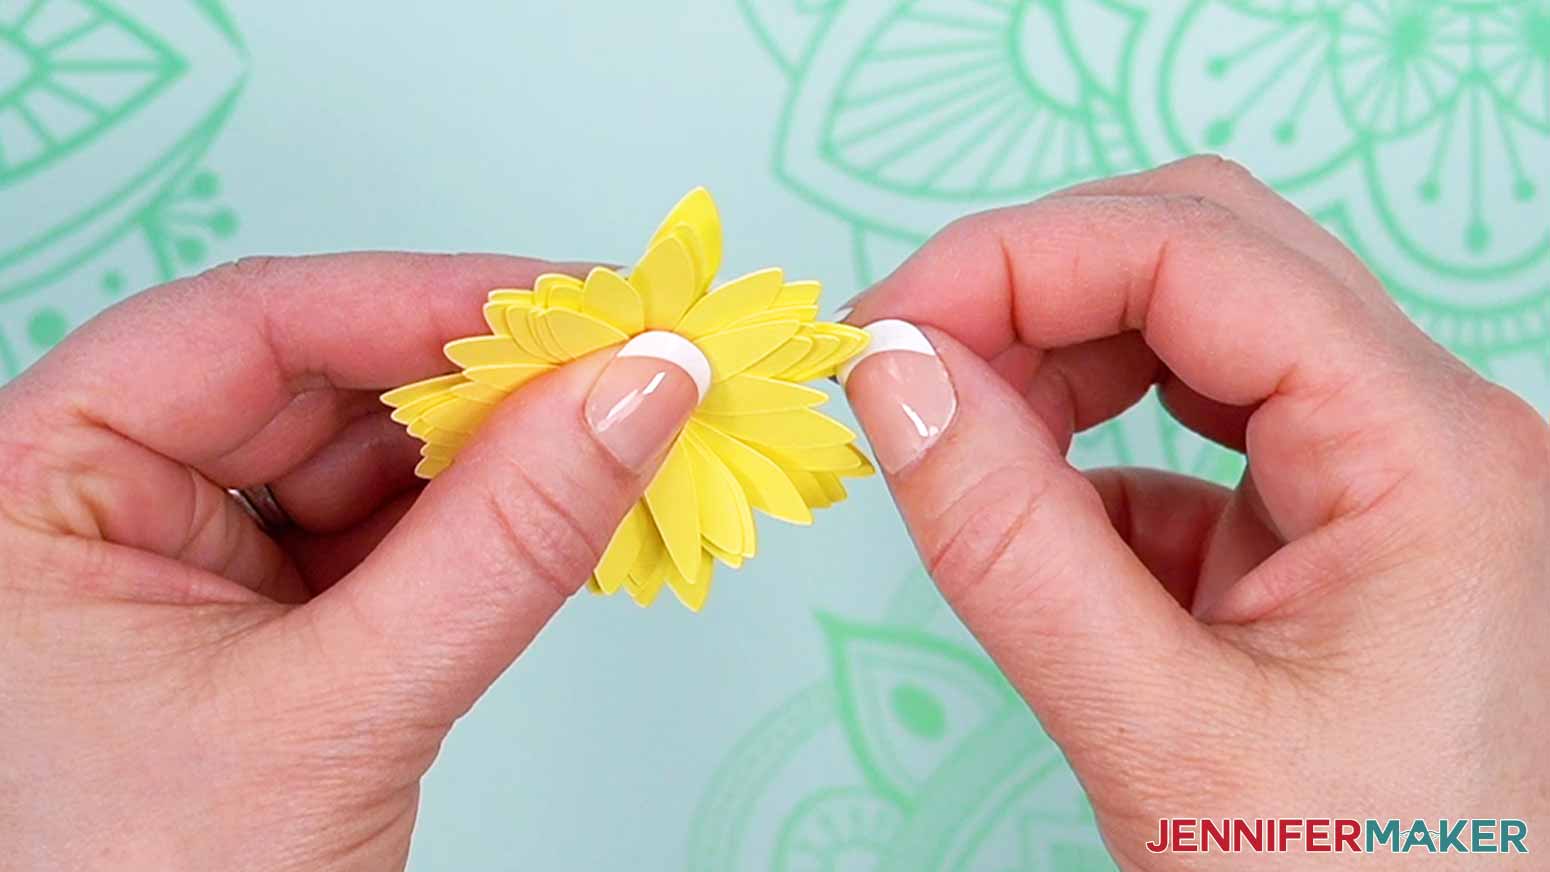 Make adjustments to the petals so they are distributed in a nice shape.